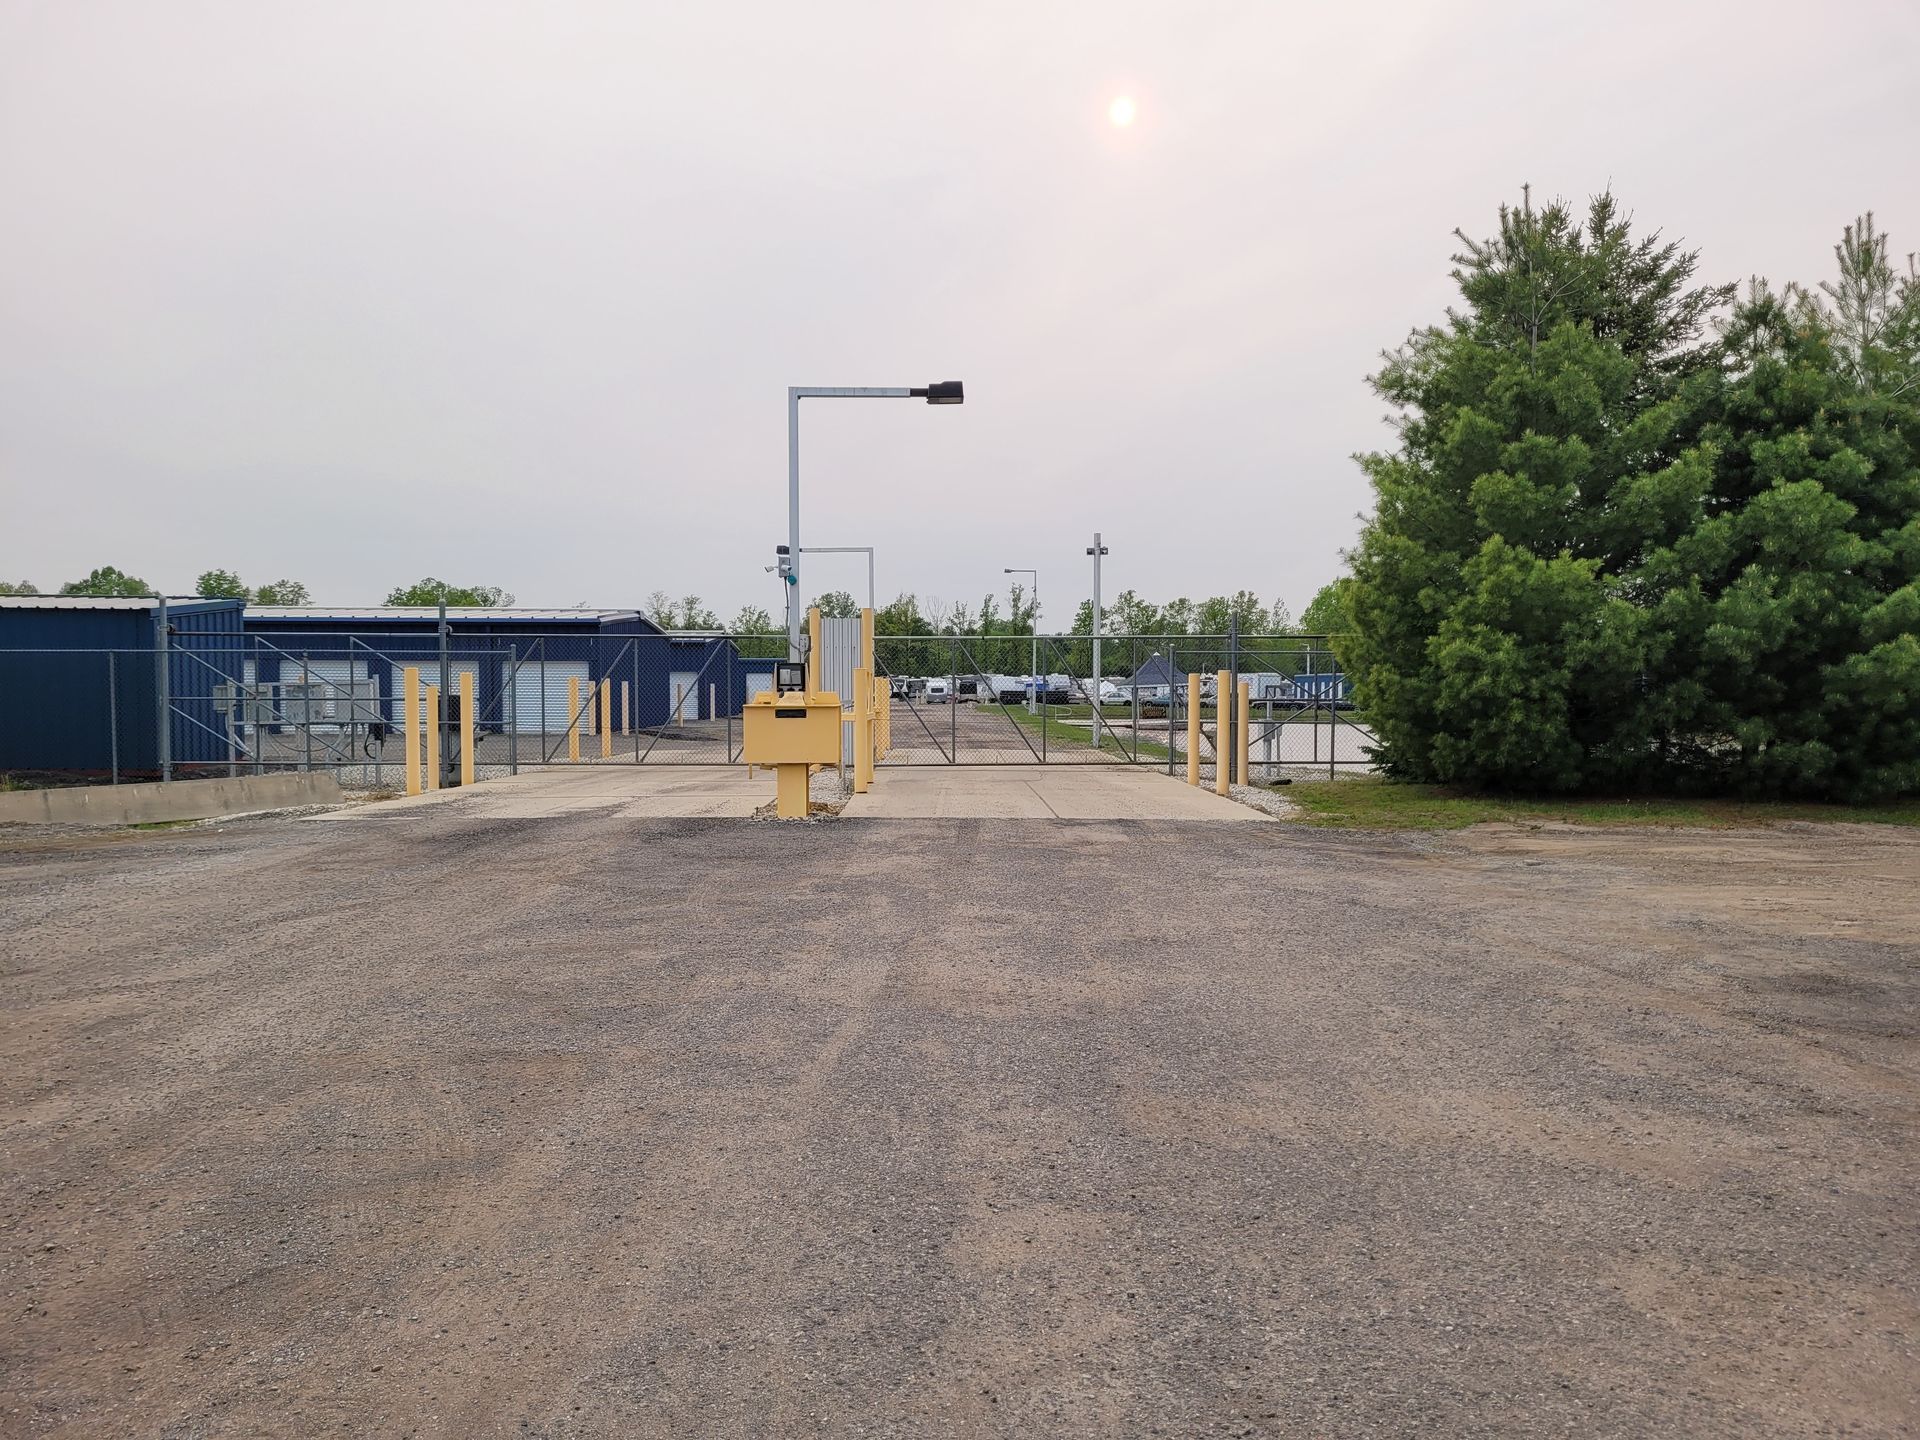 self-storage facility with metal gate and trees